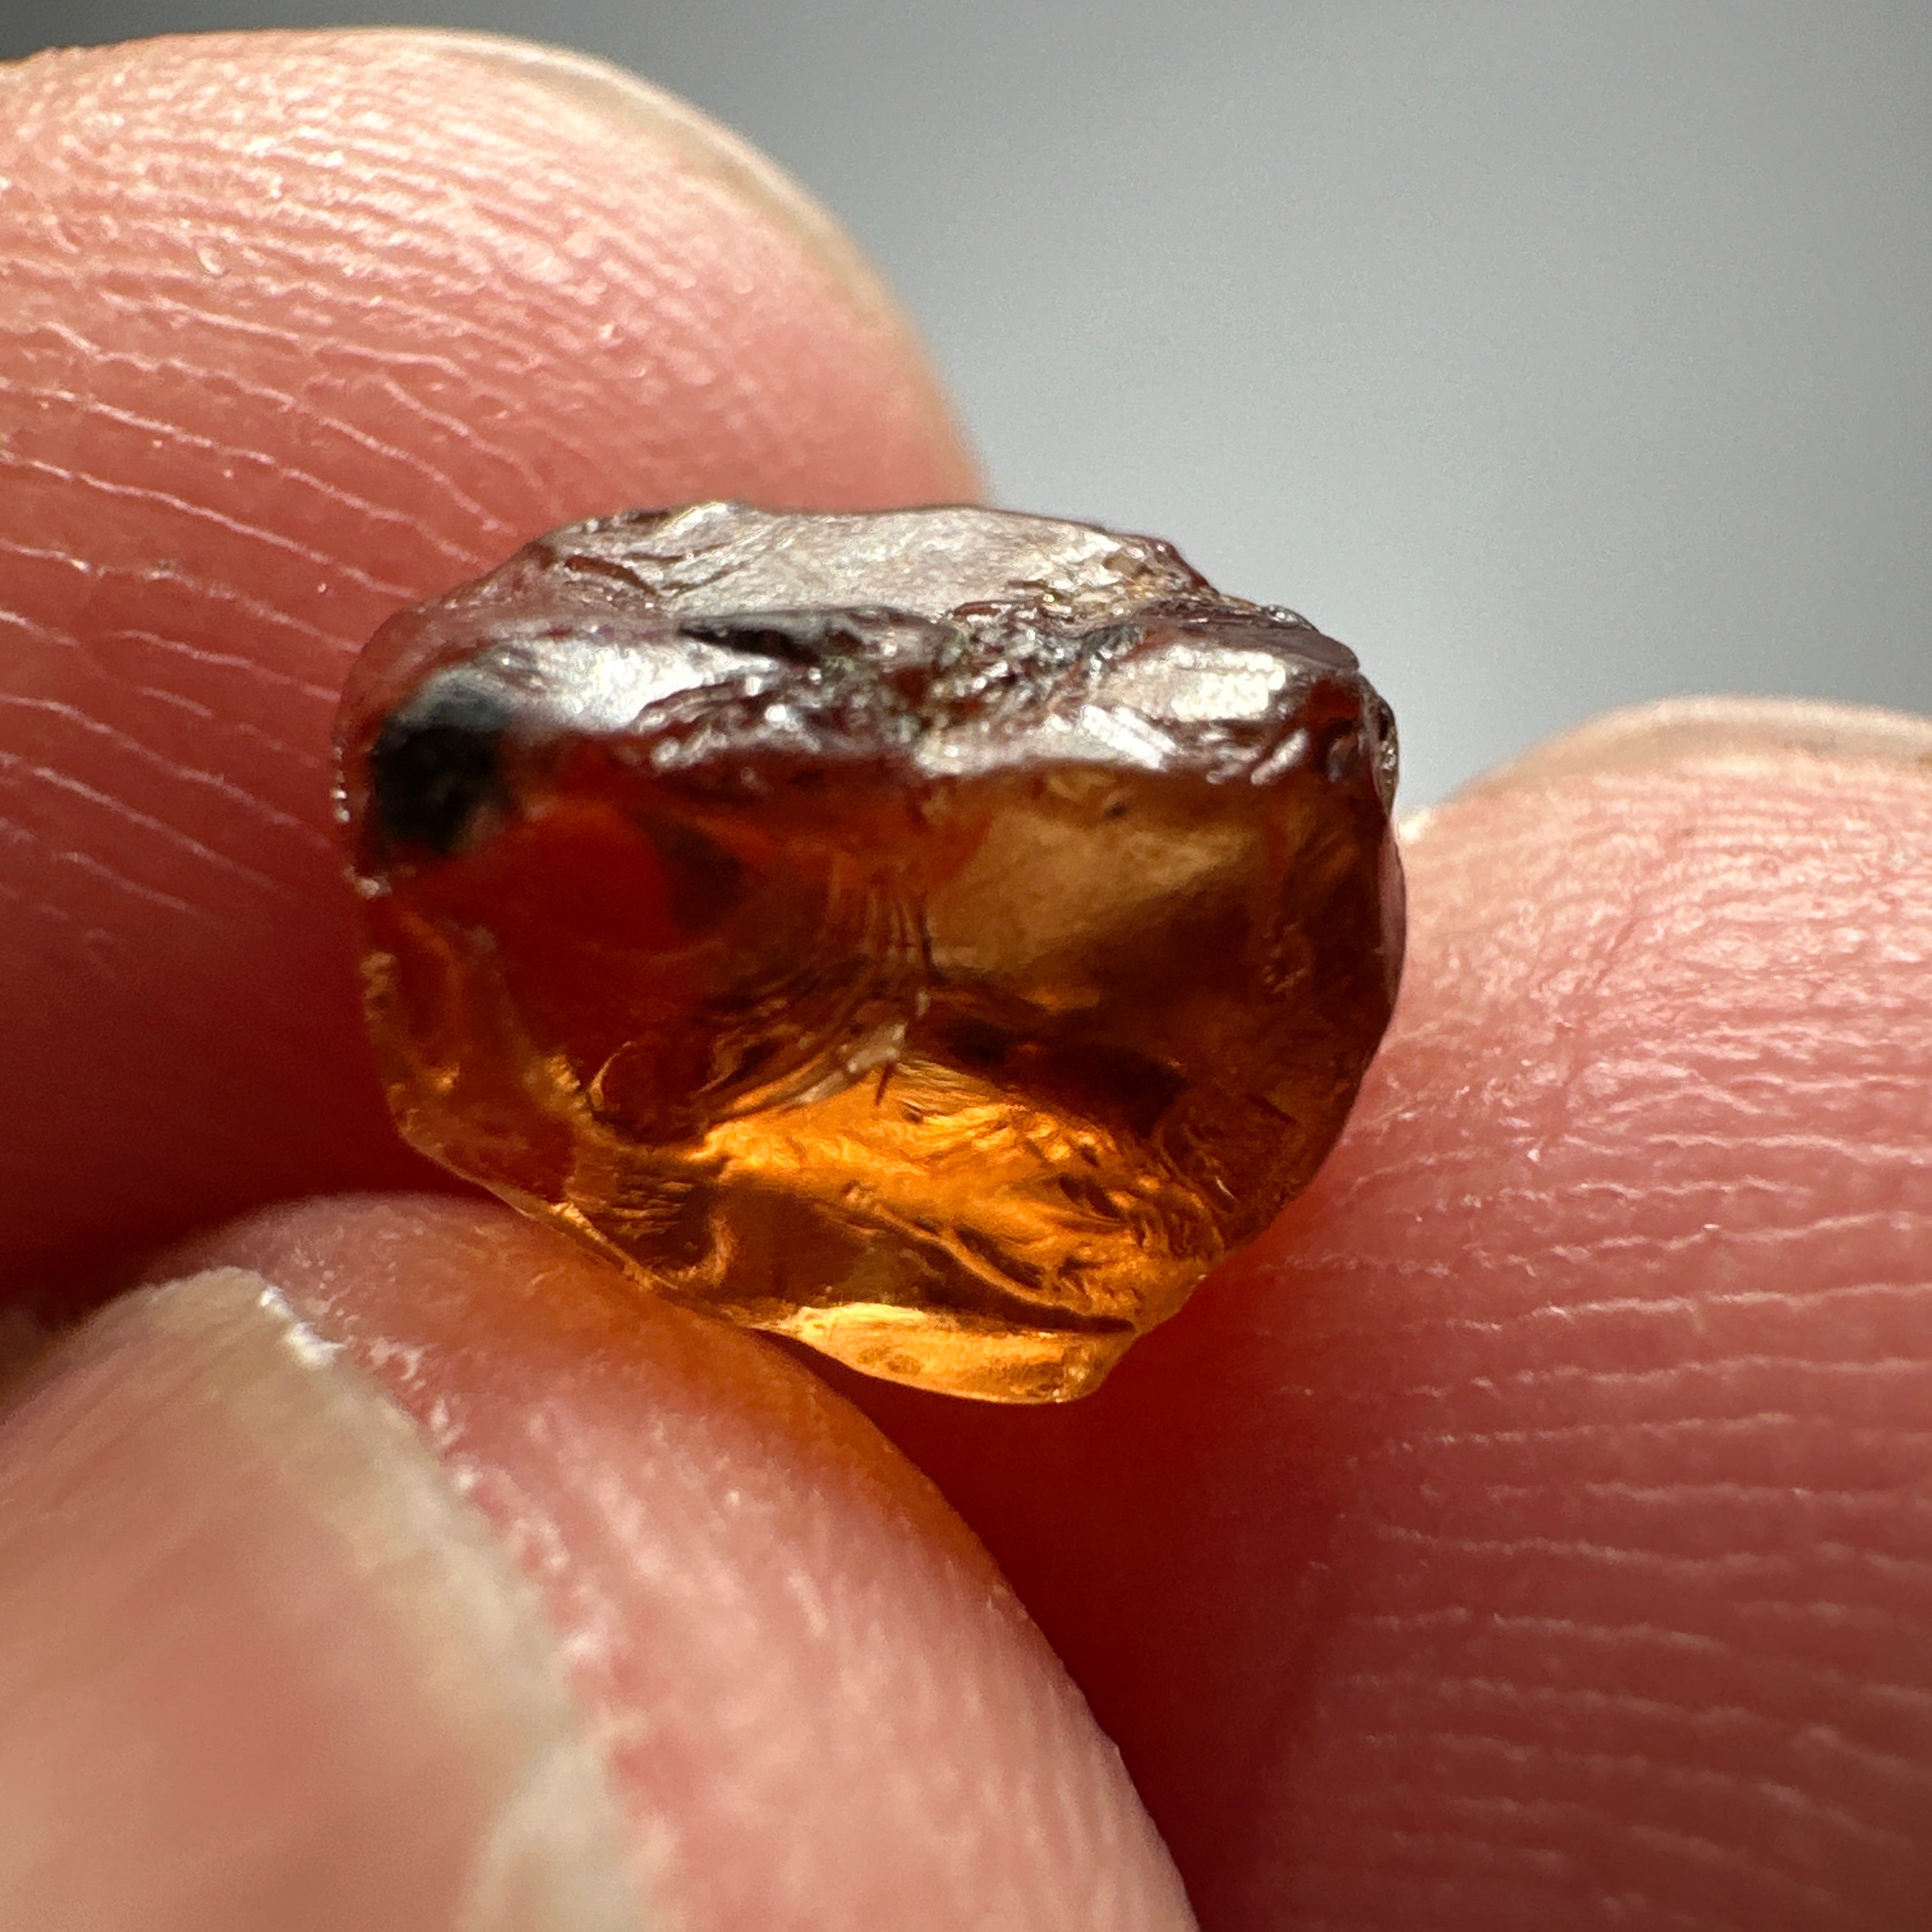 3.01ct Colour Change Garnet, Tanzania, Untreated Unheated, slight inclusion on the skin on the outside